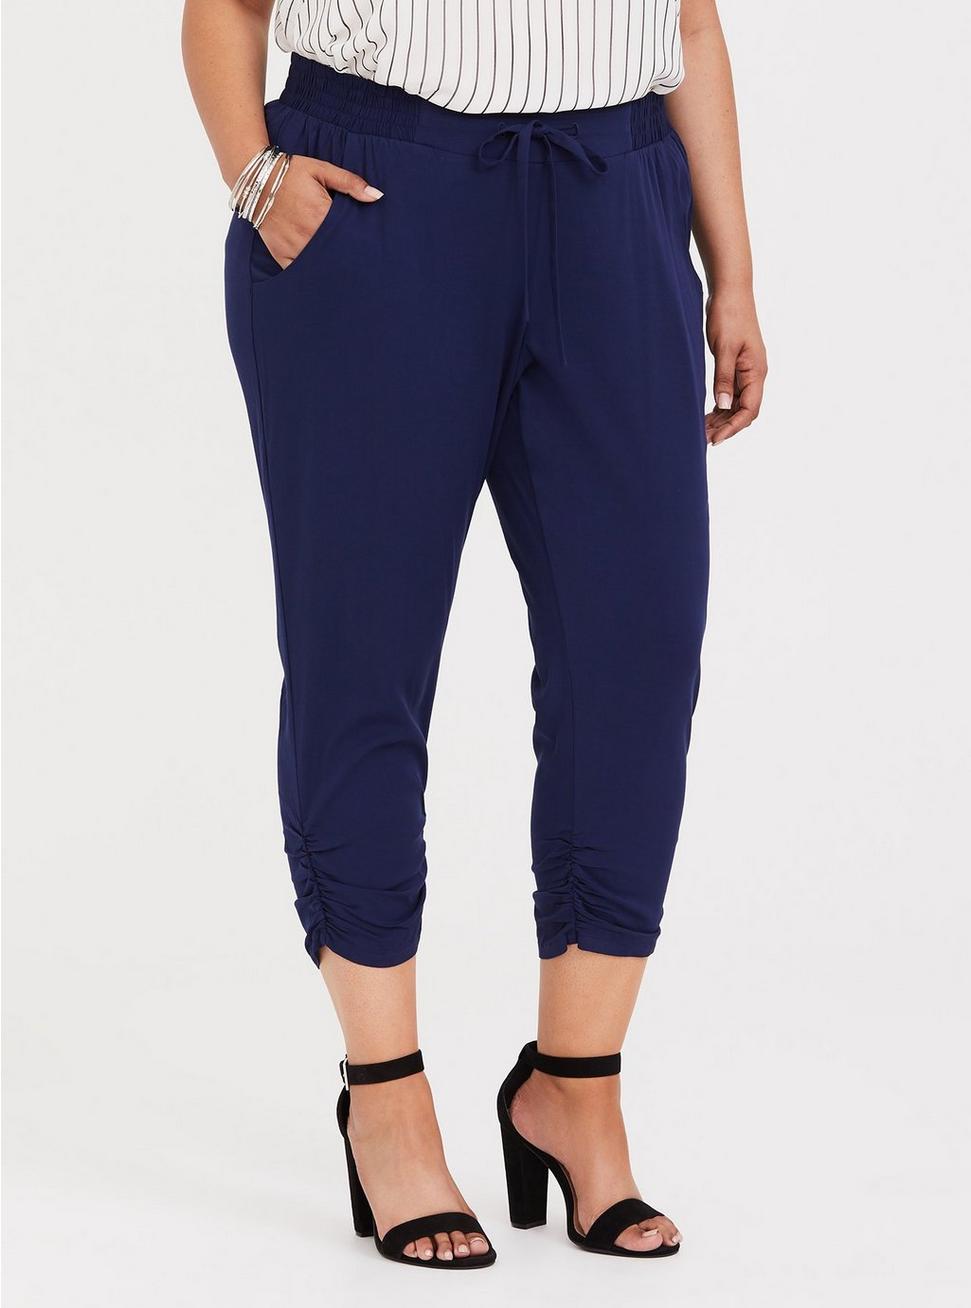 Plus Size - Navy Ruched Stretch Challis Jogger - Torrid